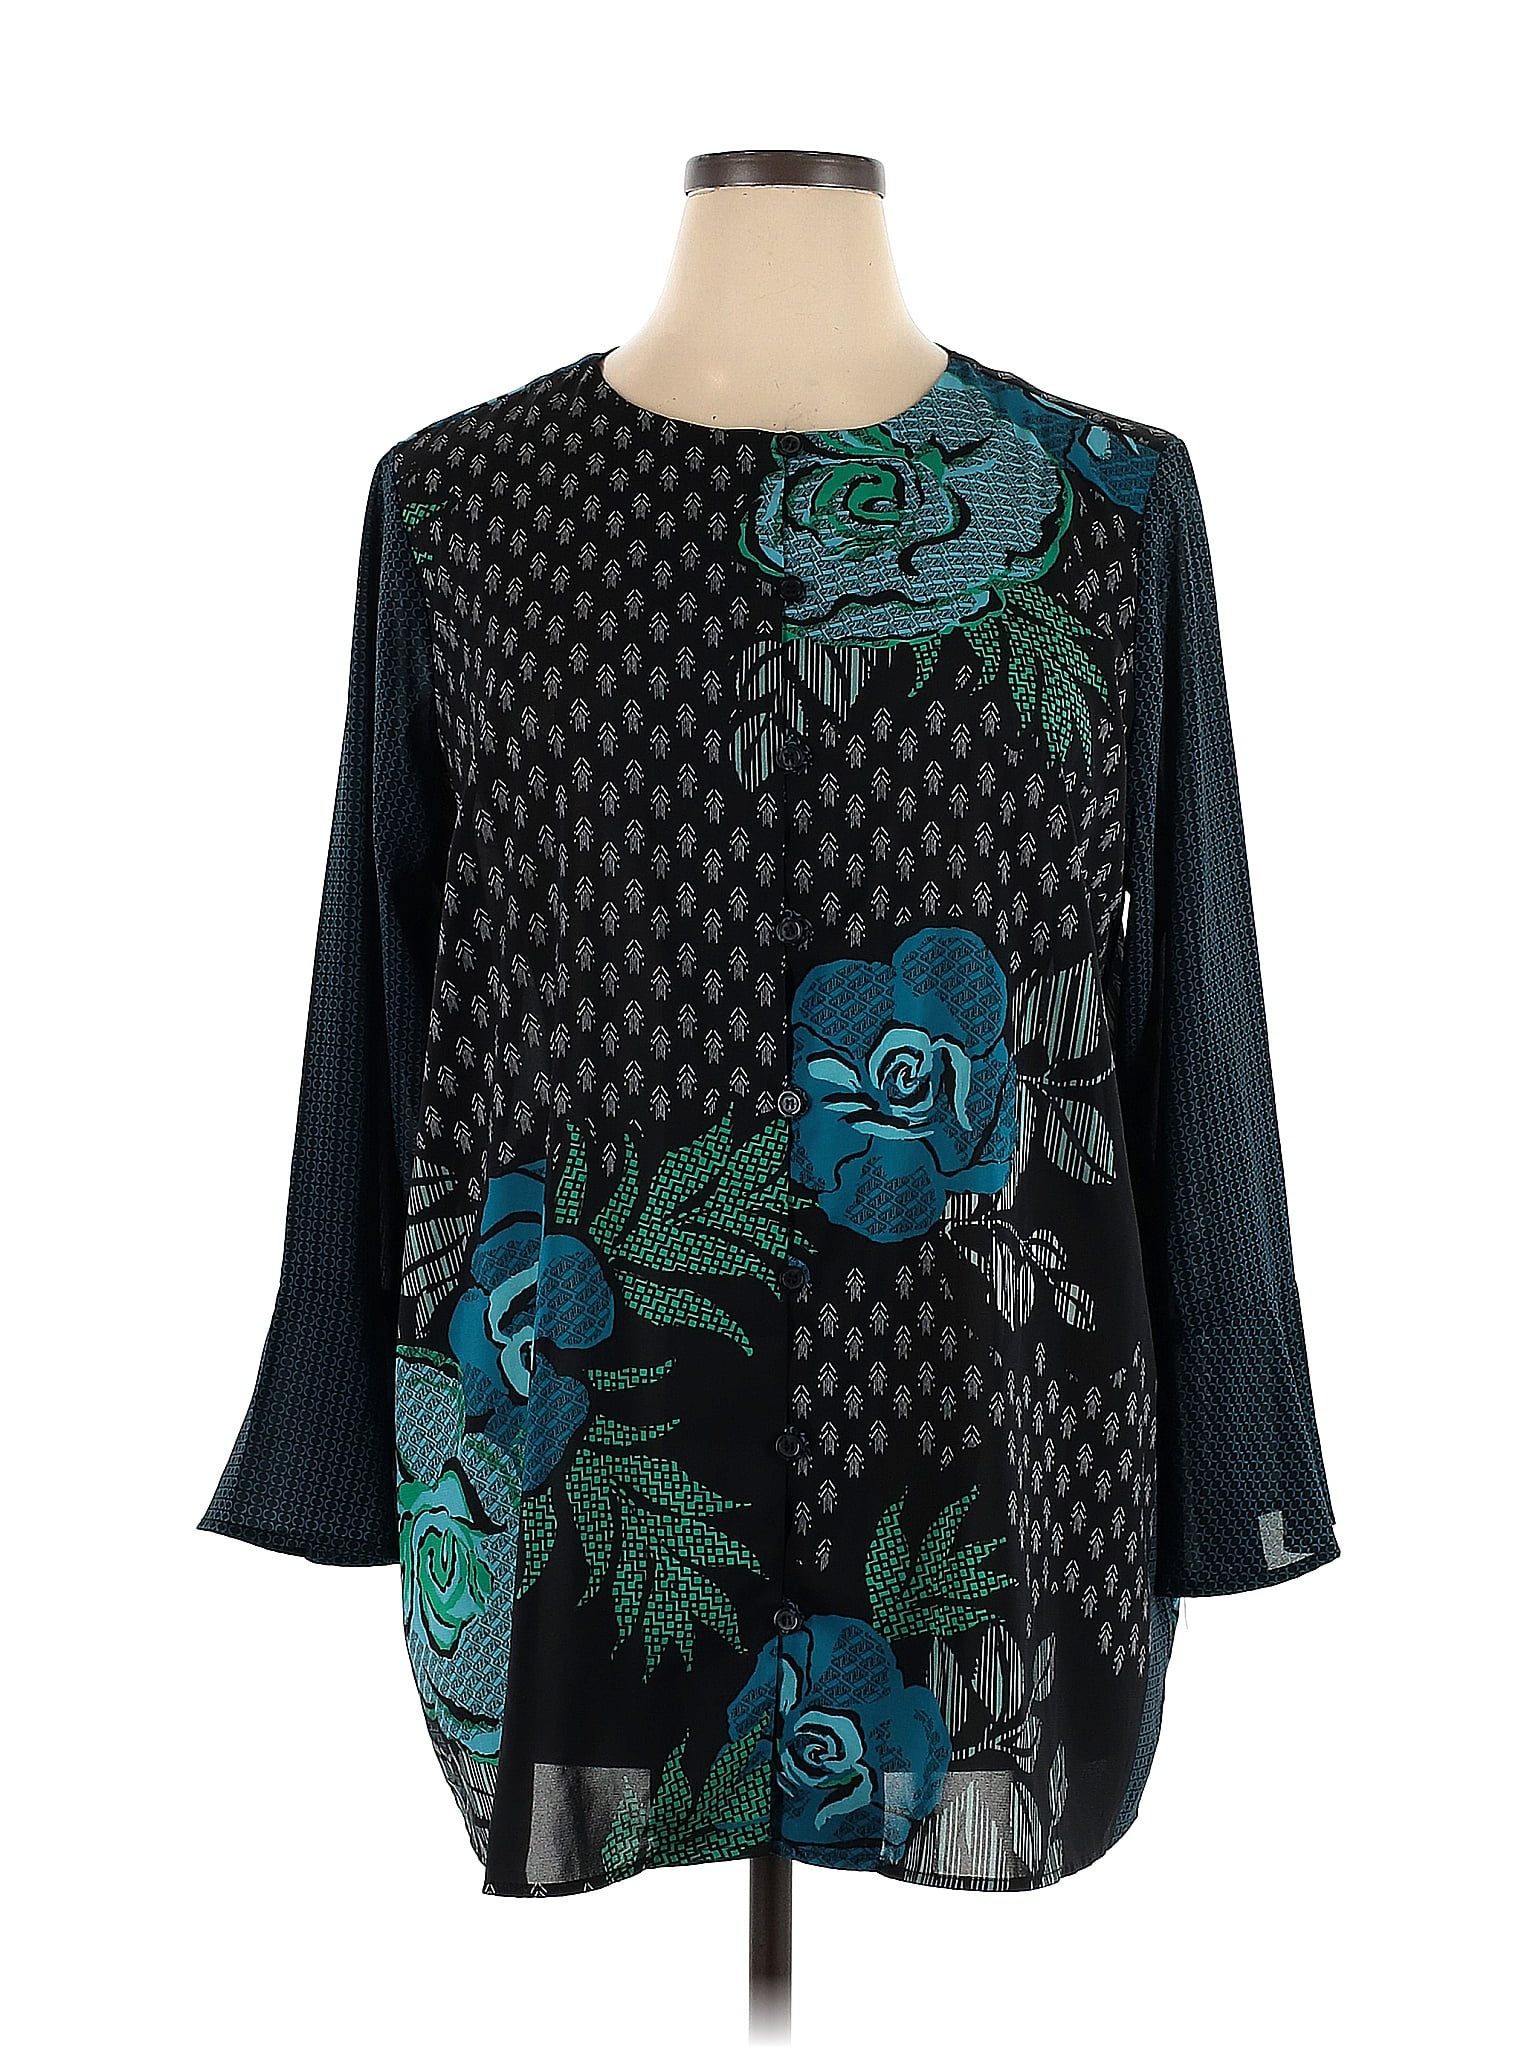 Bob Mackie Color Block Floral Teal Long Sleeve Blouse Size XL - 55% off ...